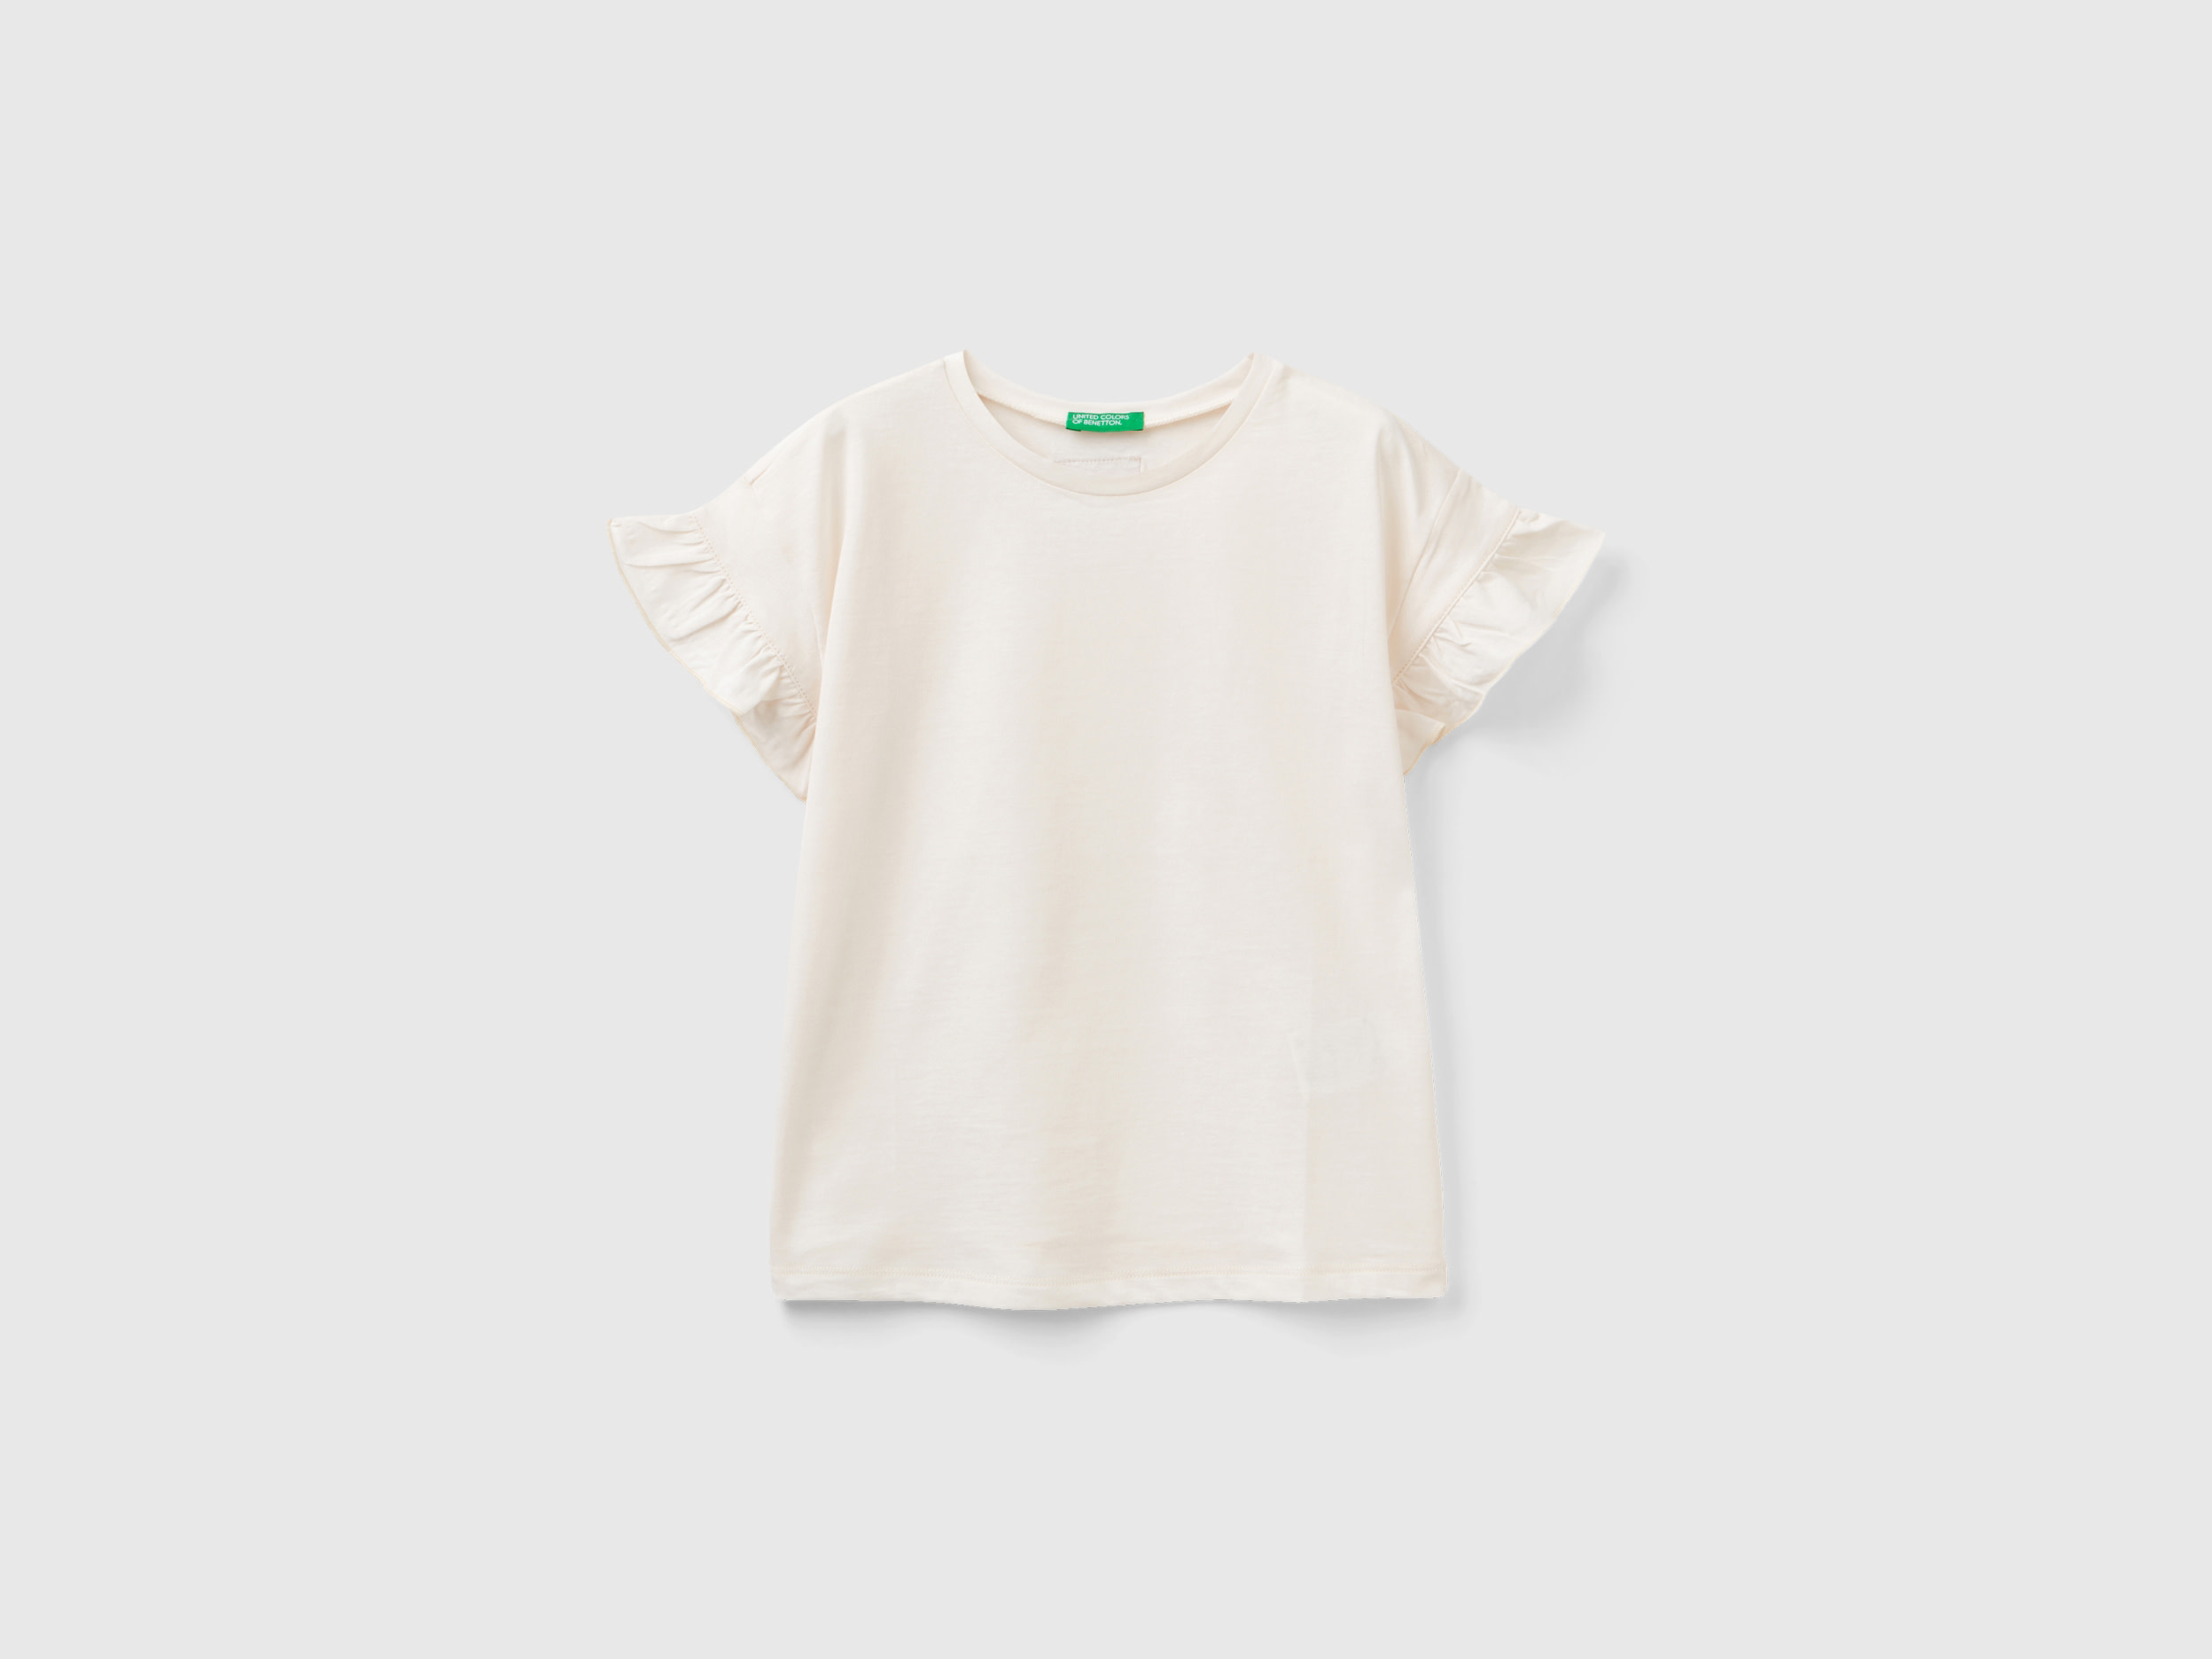 Benetton, Short Sleeve T-shirt With Rouches, size 2XL, Creamy White, Kids